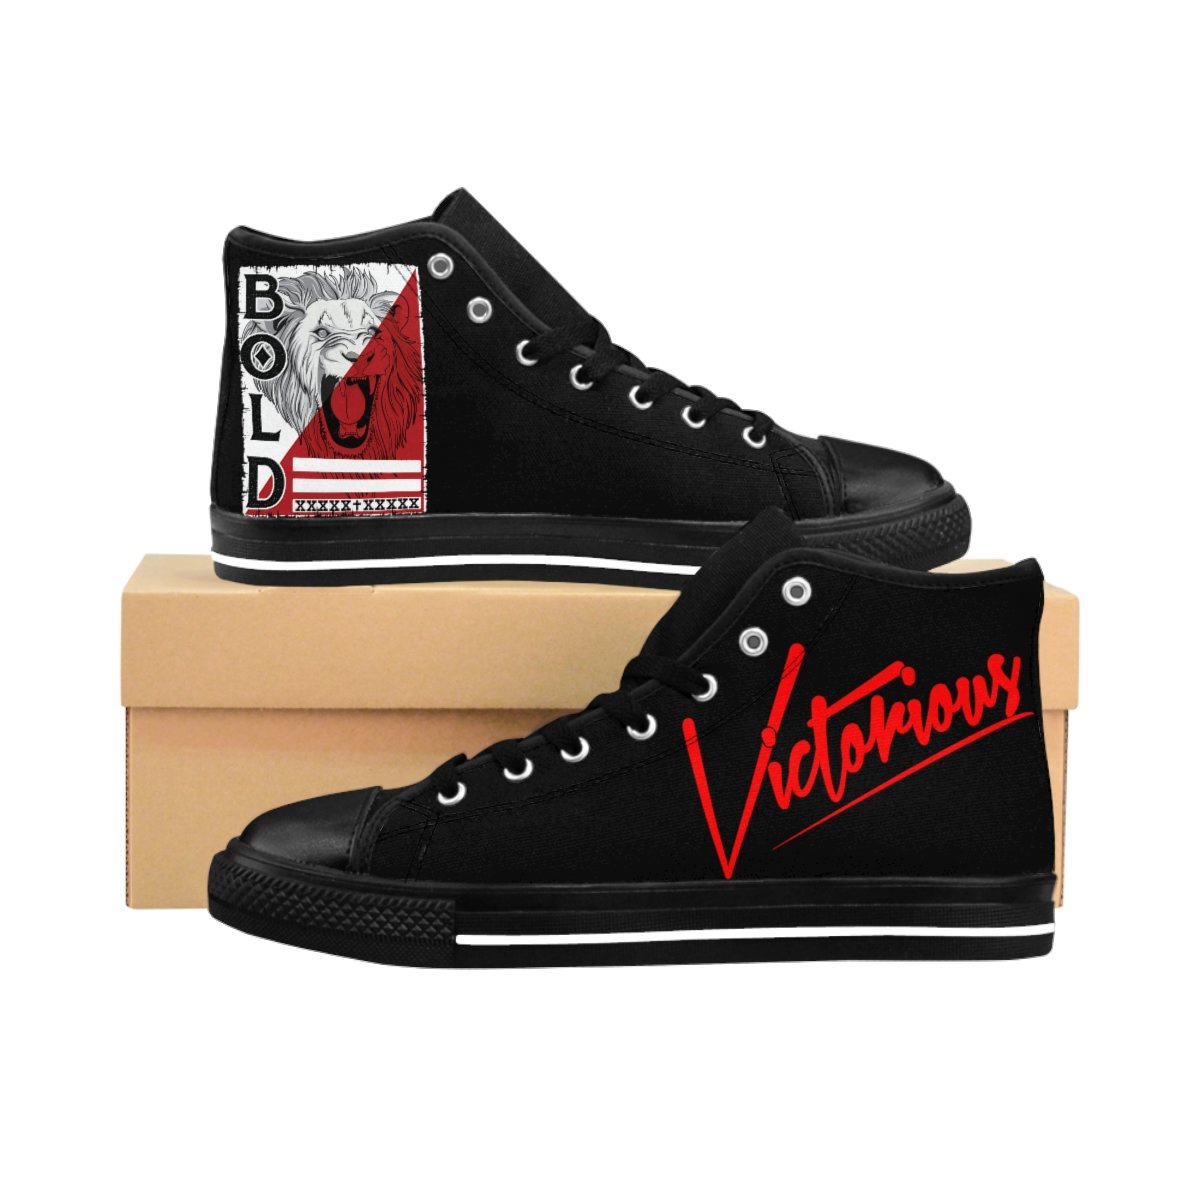 Victorious – Bold Men’s High-top Sneakers